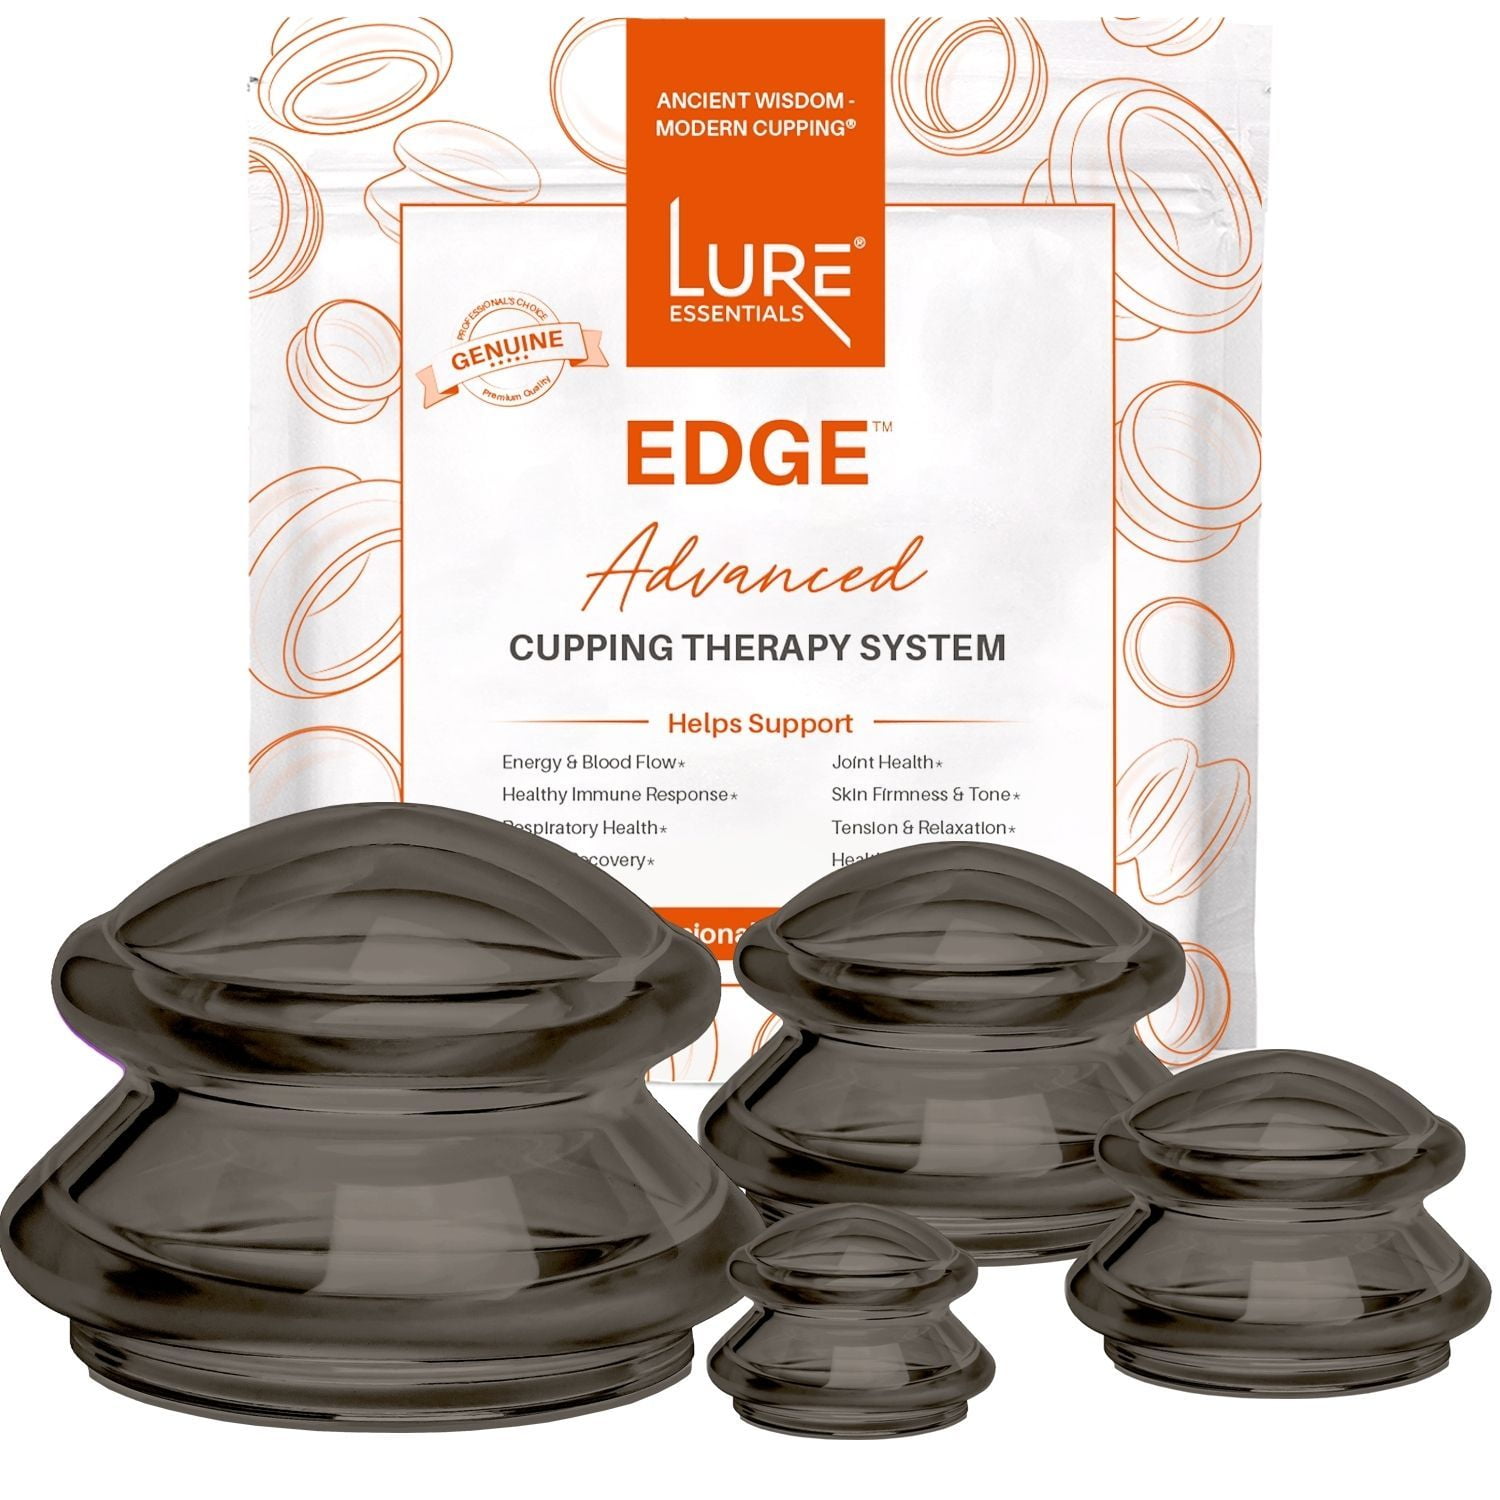 LURE Essentials Edge Cupping Set – Ultra Onyx Silicone Cupping